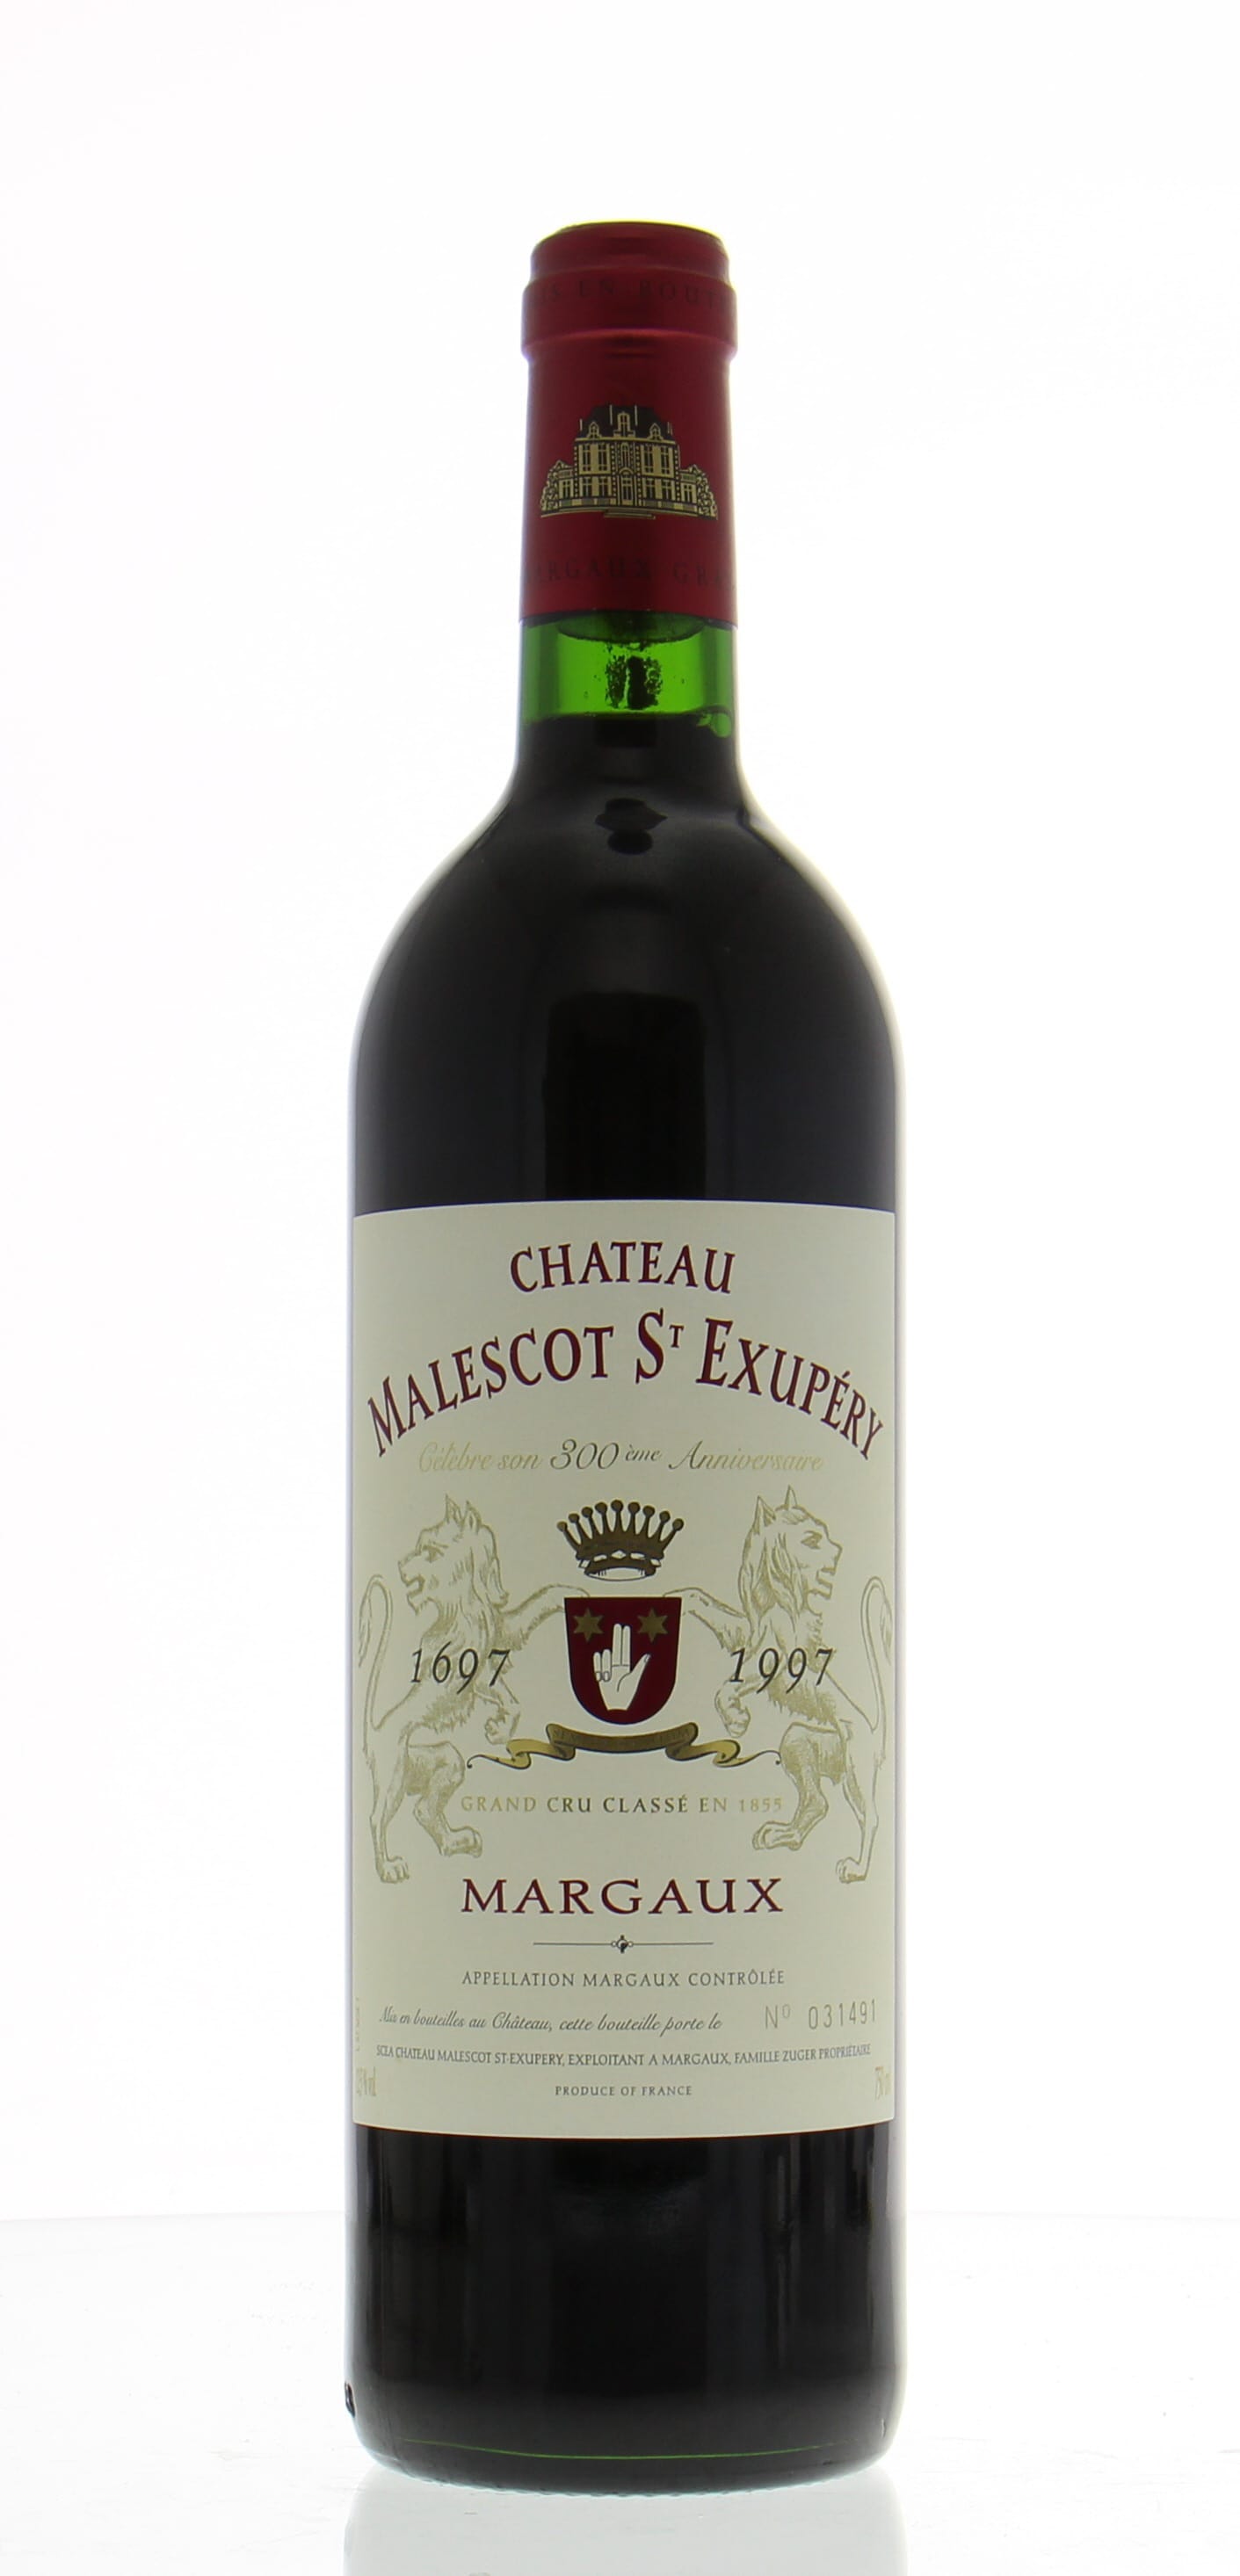 Chateau Malescot-St-Exupery - Chateau Malescot-St-Exupery 1997 Perfect